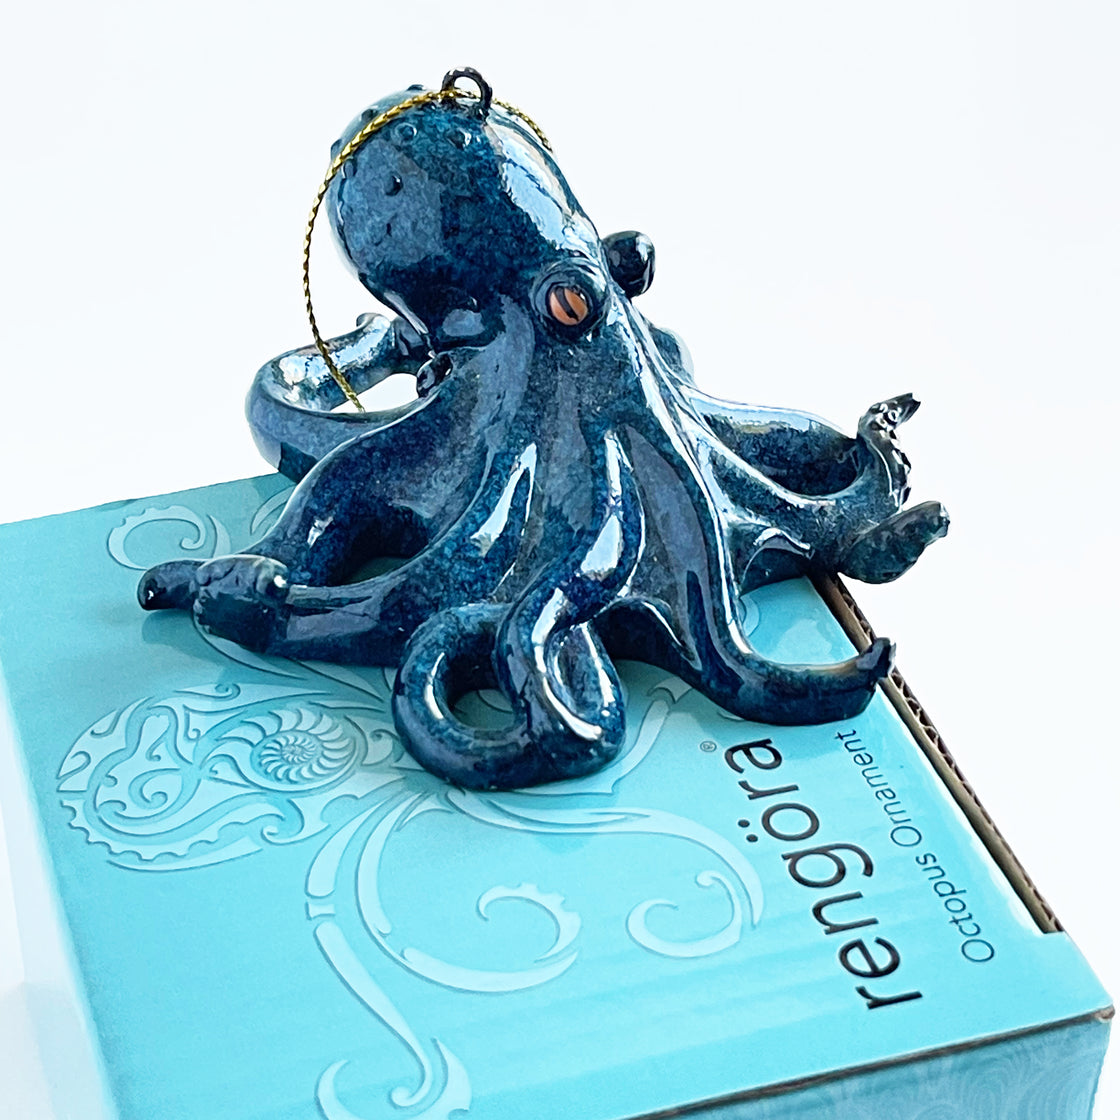 The Rengora octopus ornament is elegantly perched on its own packaging